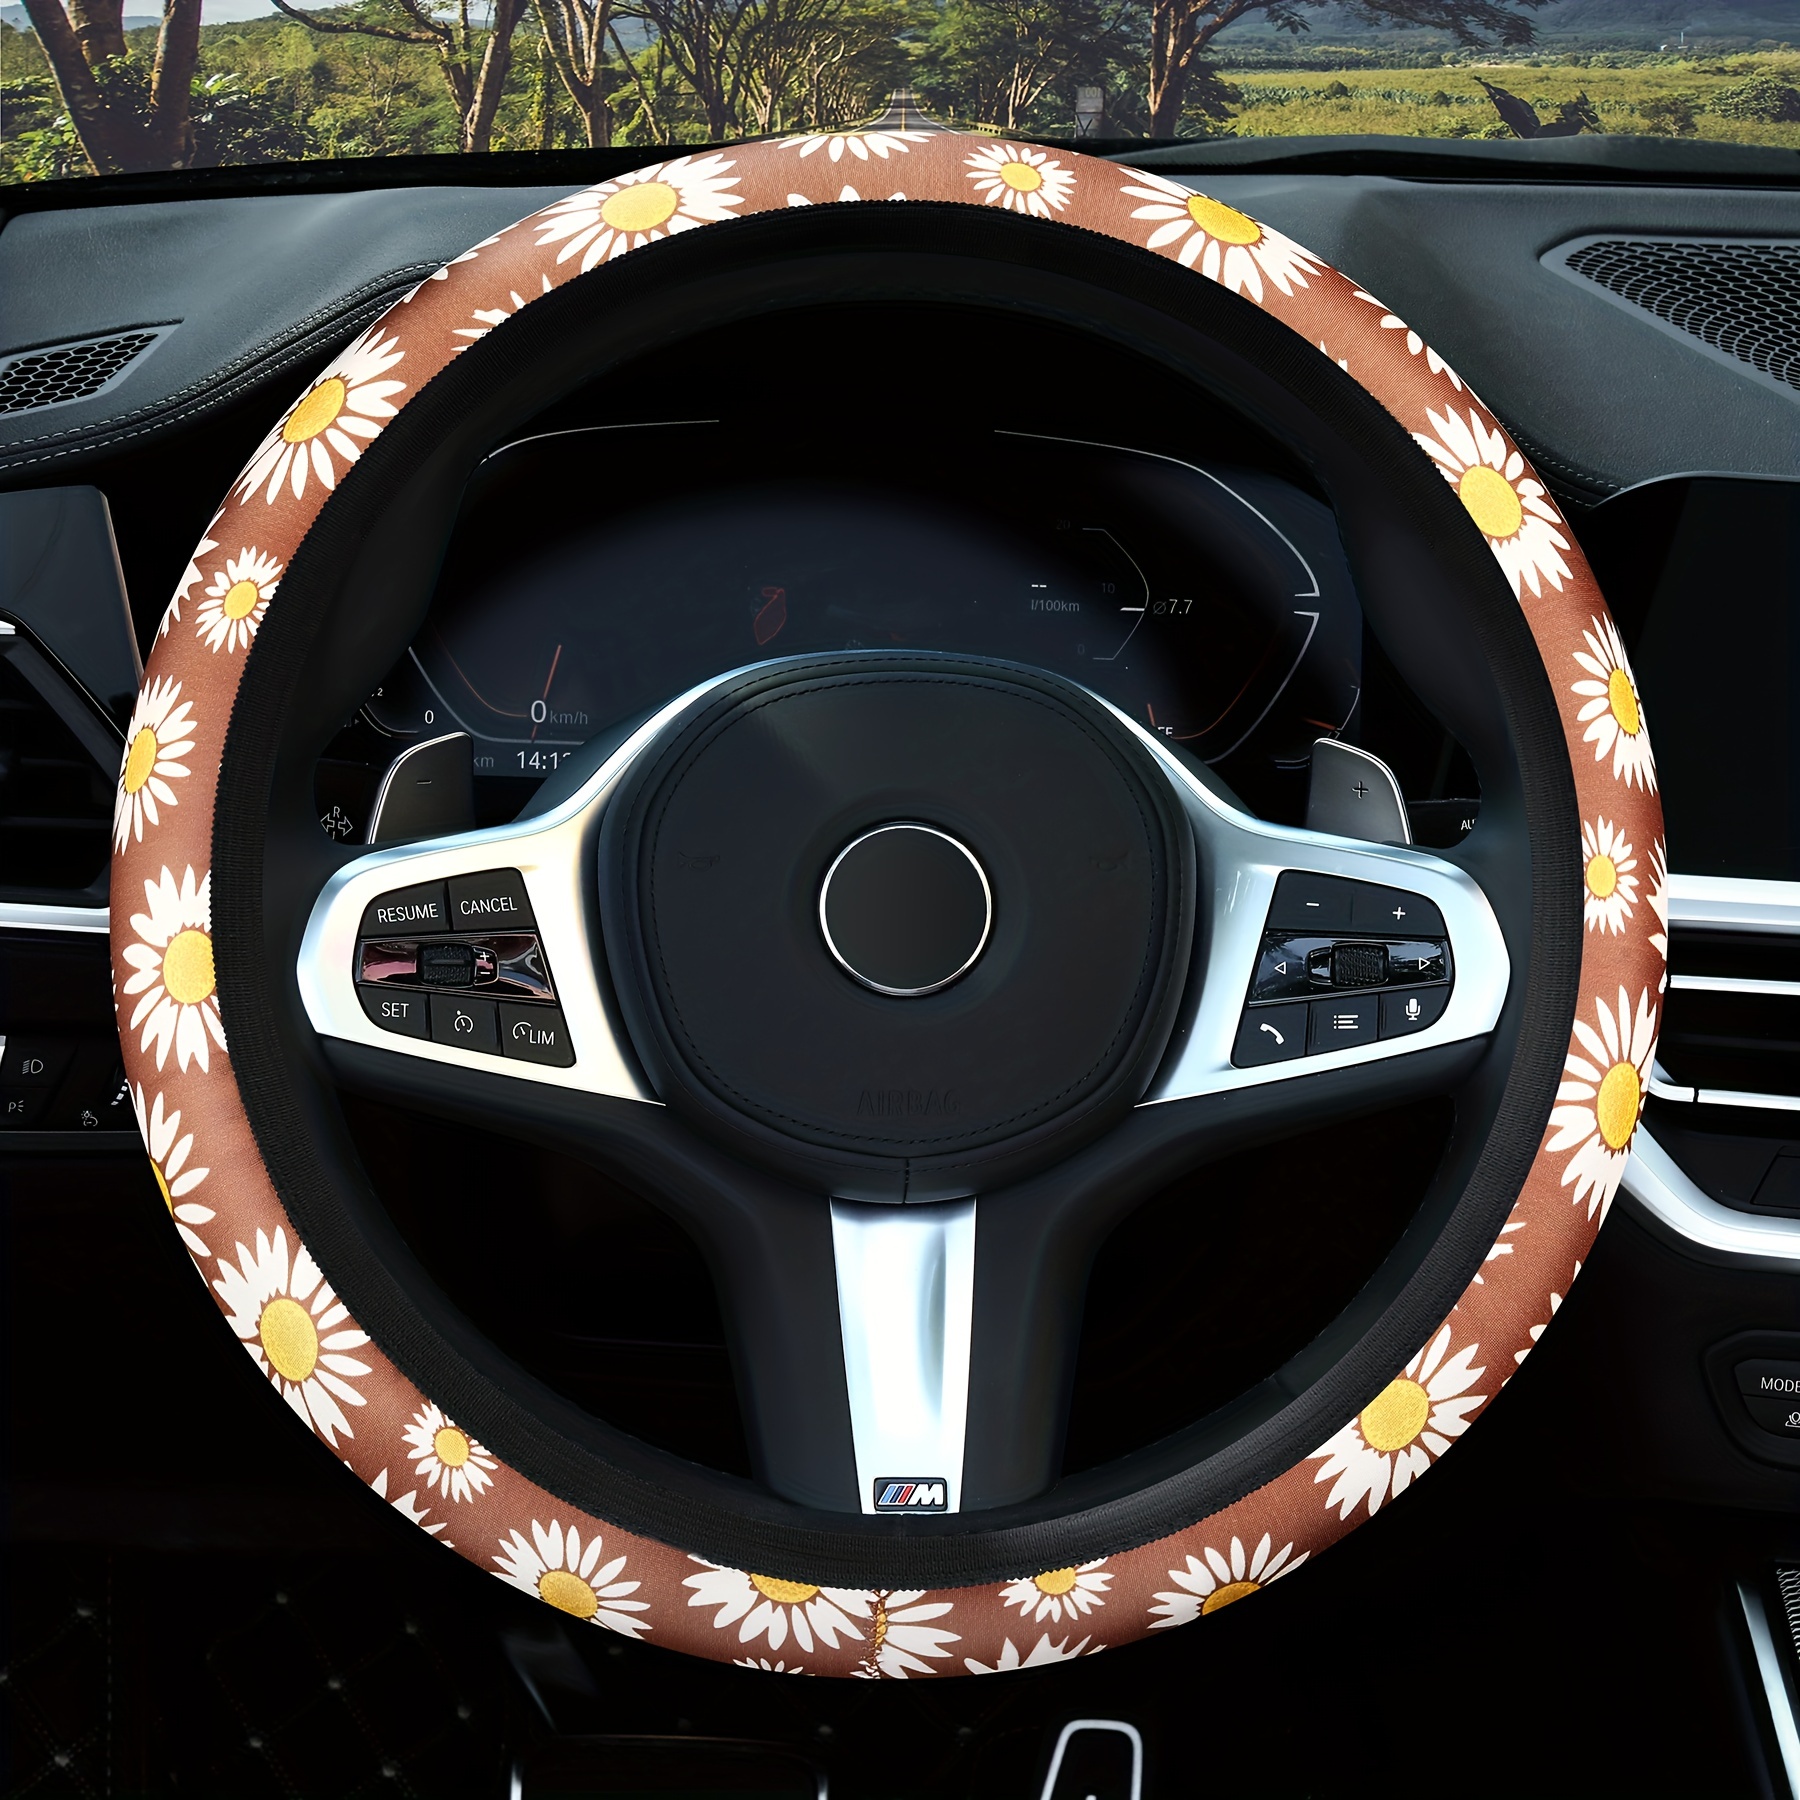 New Universal Car Cute Daisy Flower Car Interior Decoration Knitted Steering  Wheel Cover Styling Interior Accessories Product From Autohand_elitestore,  $4.45